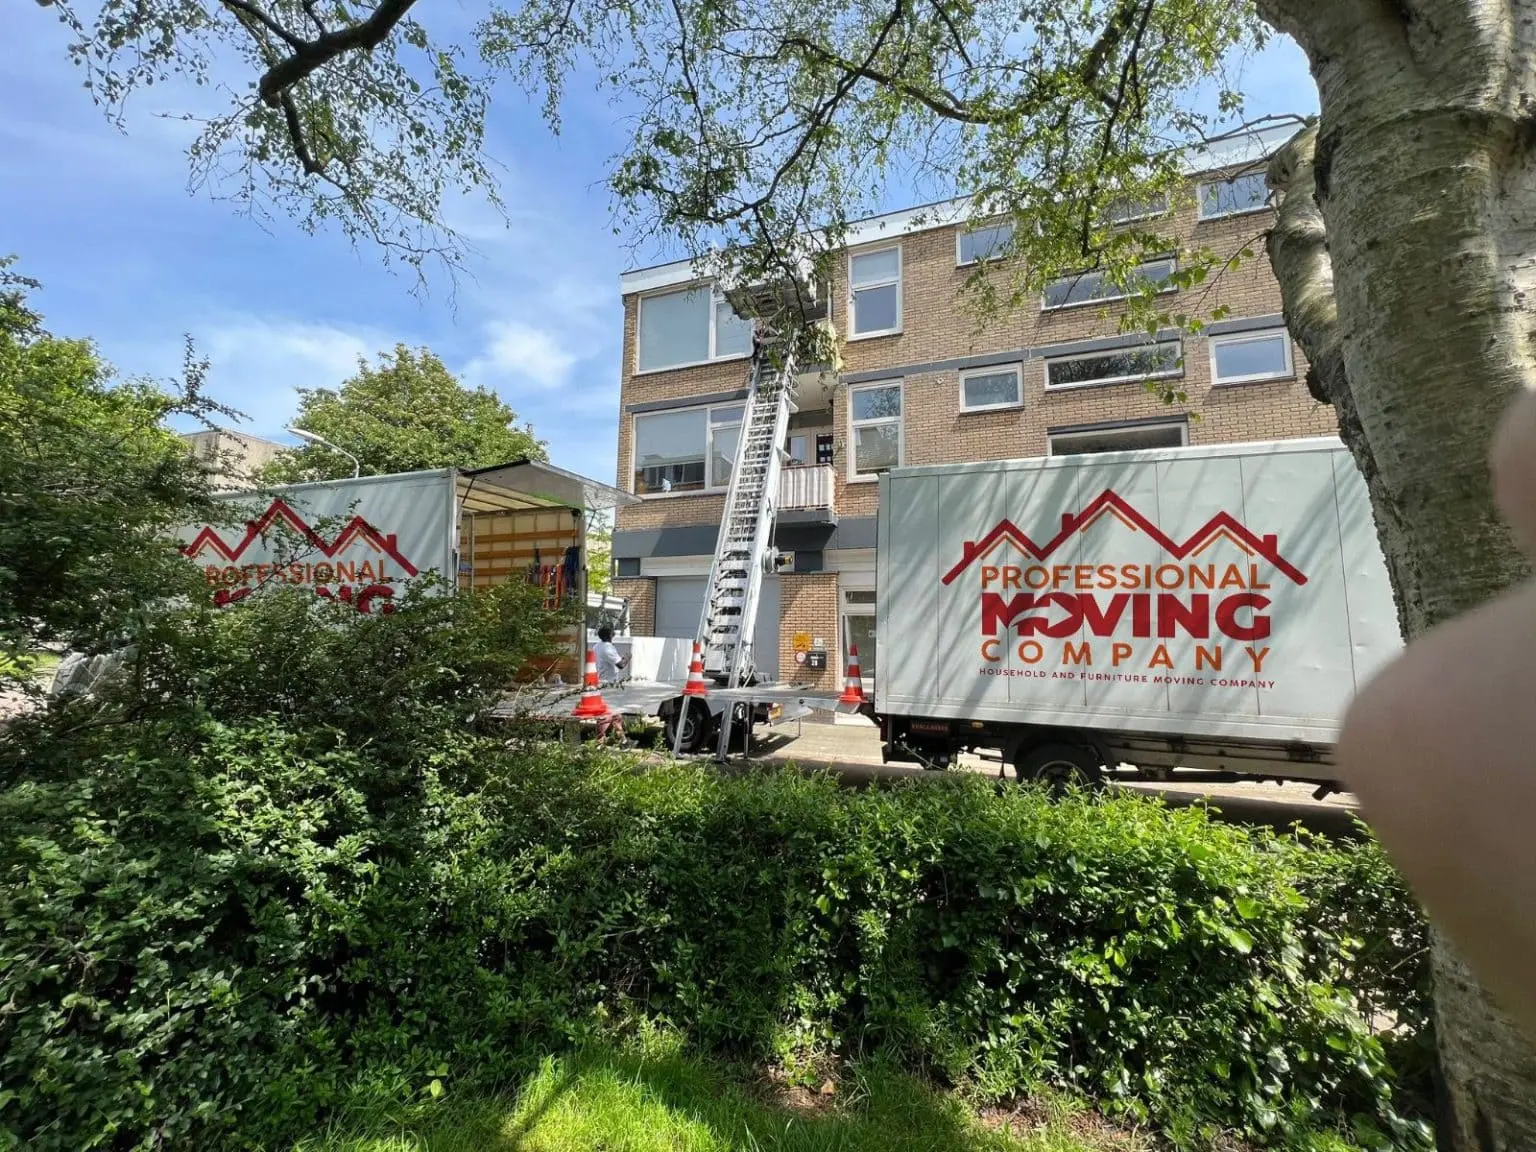 Moving Company Zwijndrecht | Tailored Moving Solutions in Zwijndrecht: Catering to Your Every Need